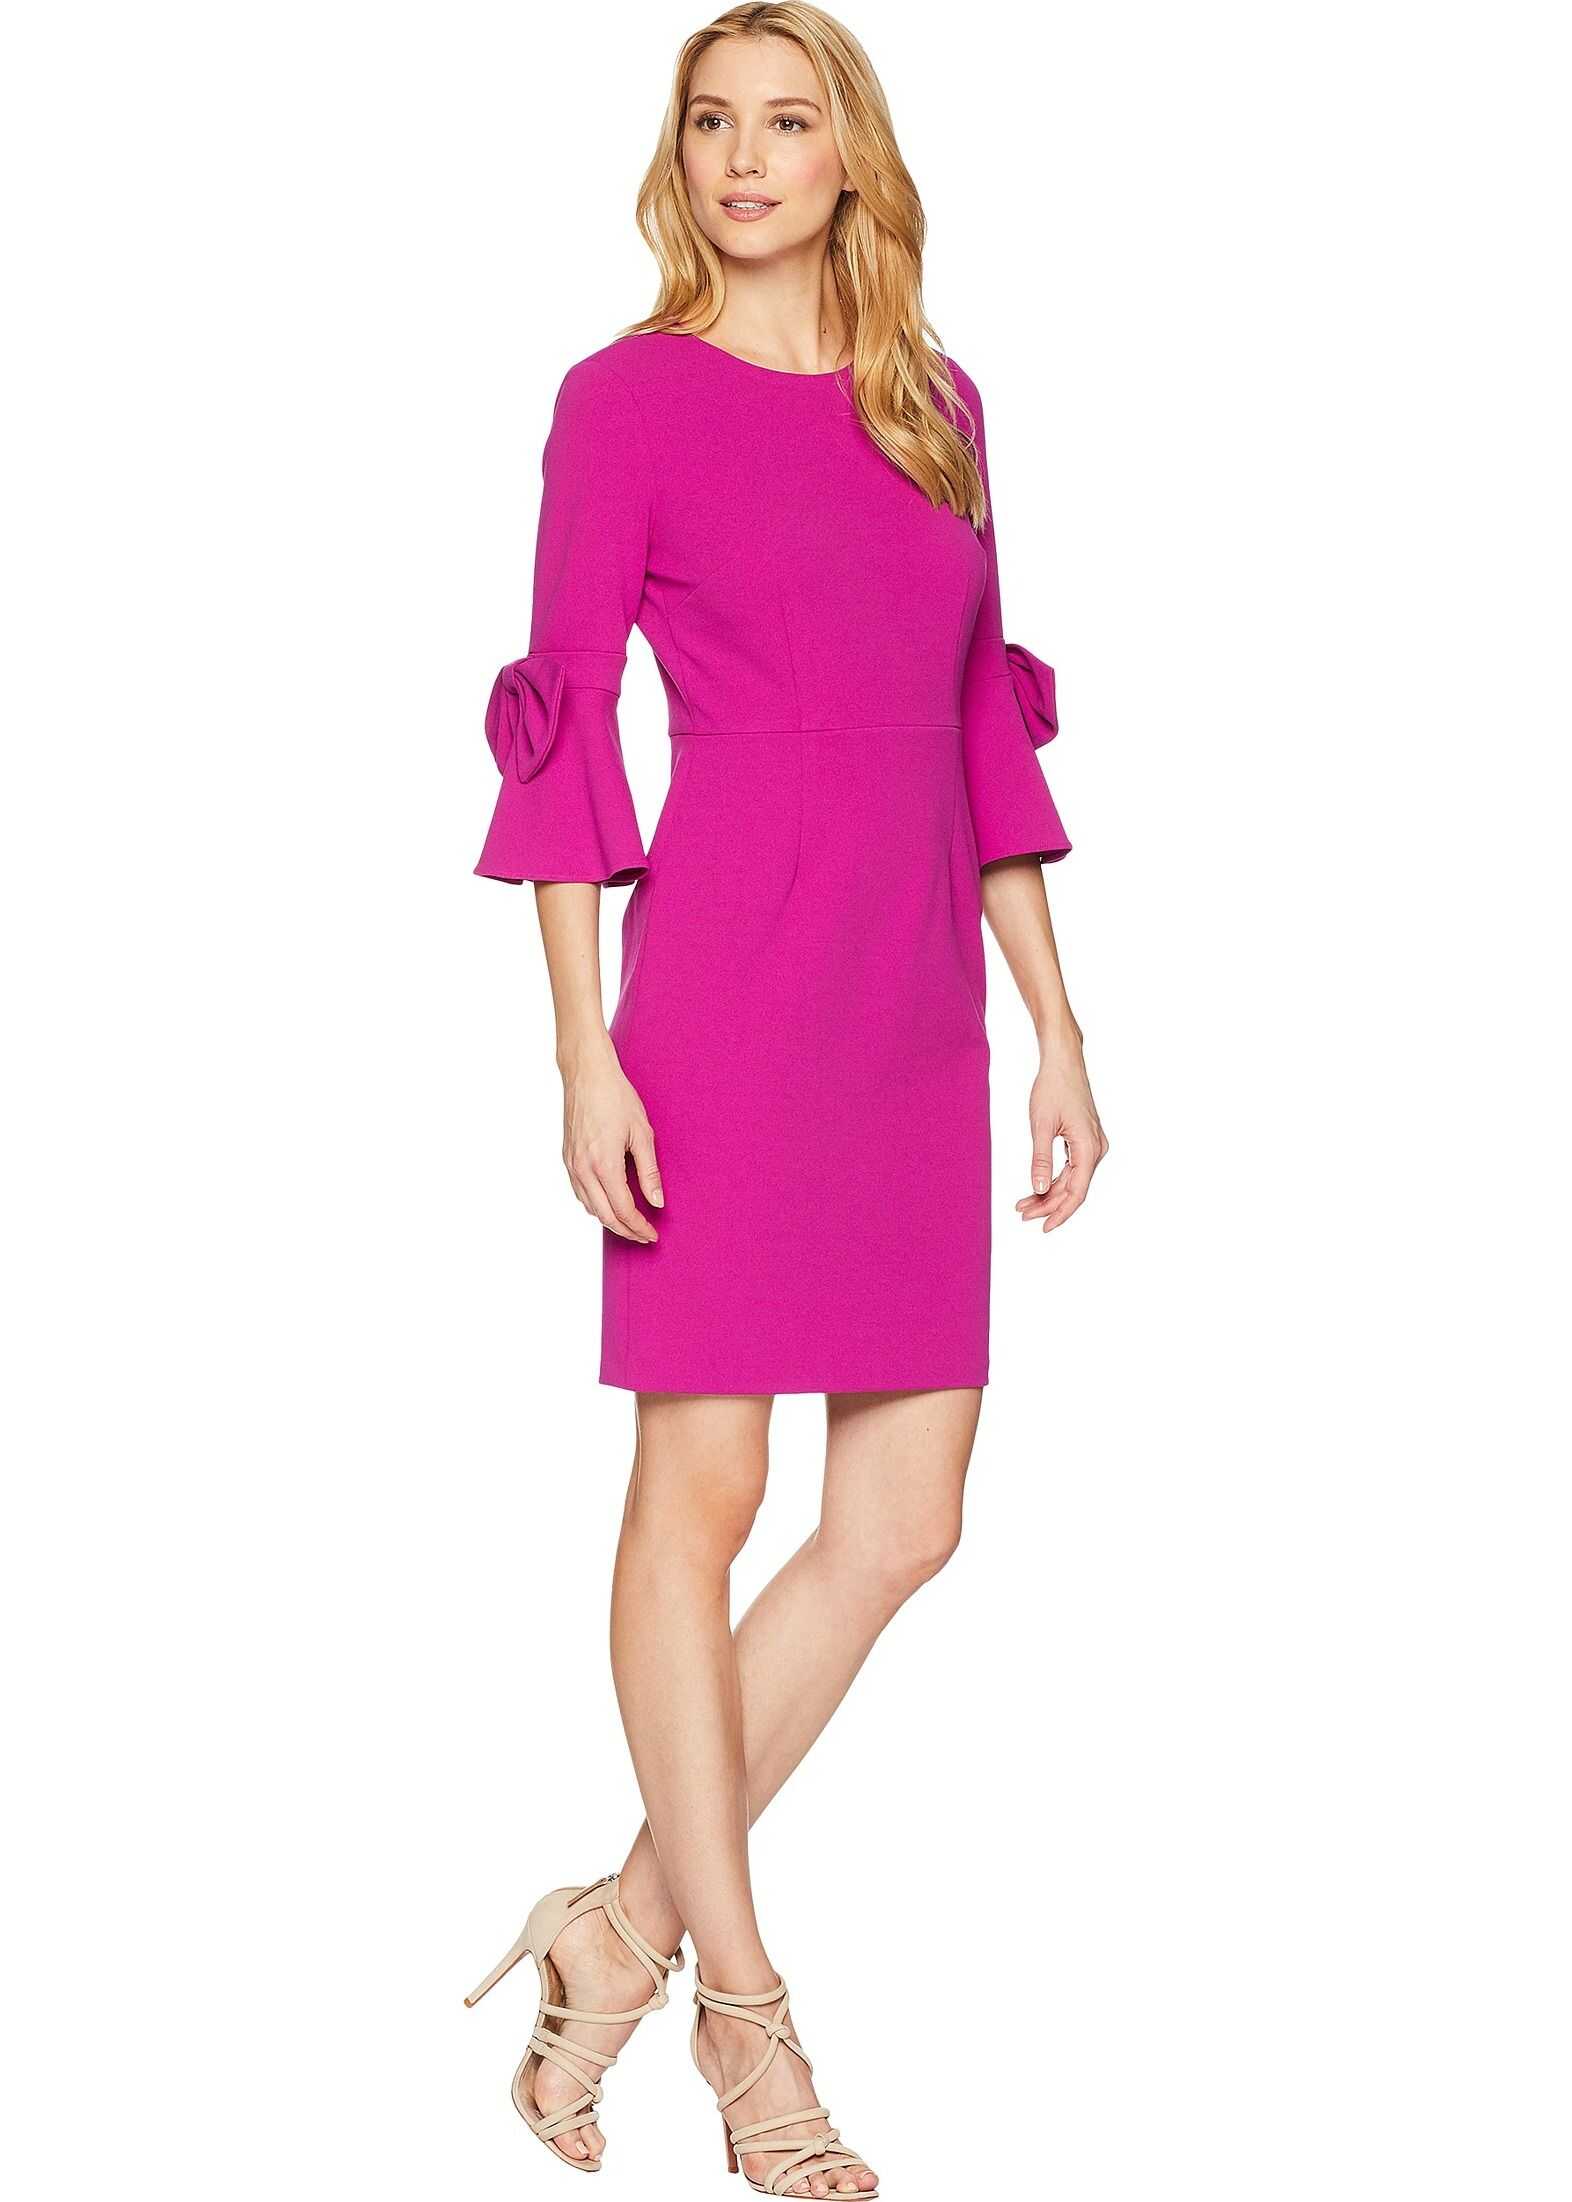 Donna Morgan 3/4 Bell Sleeve Crepe Shift Dress w/ Bow Detail at Wrist* Orchid